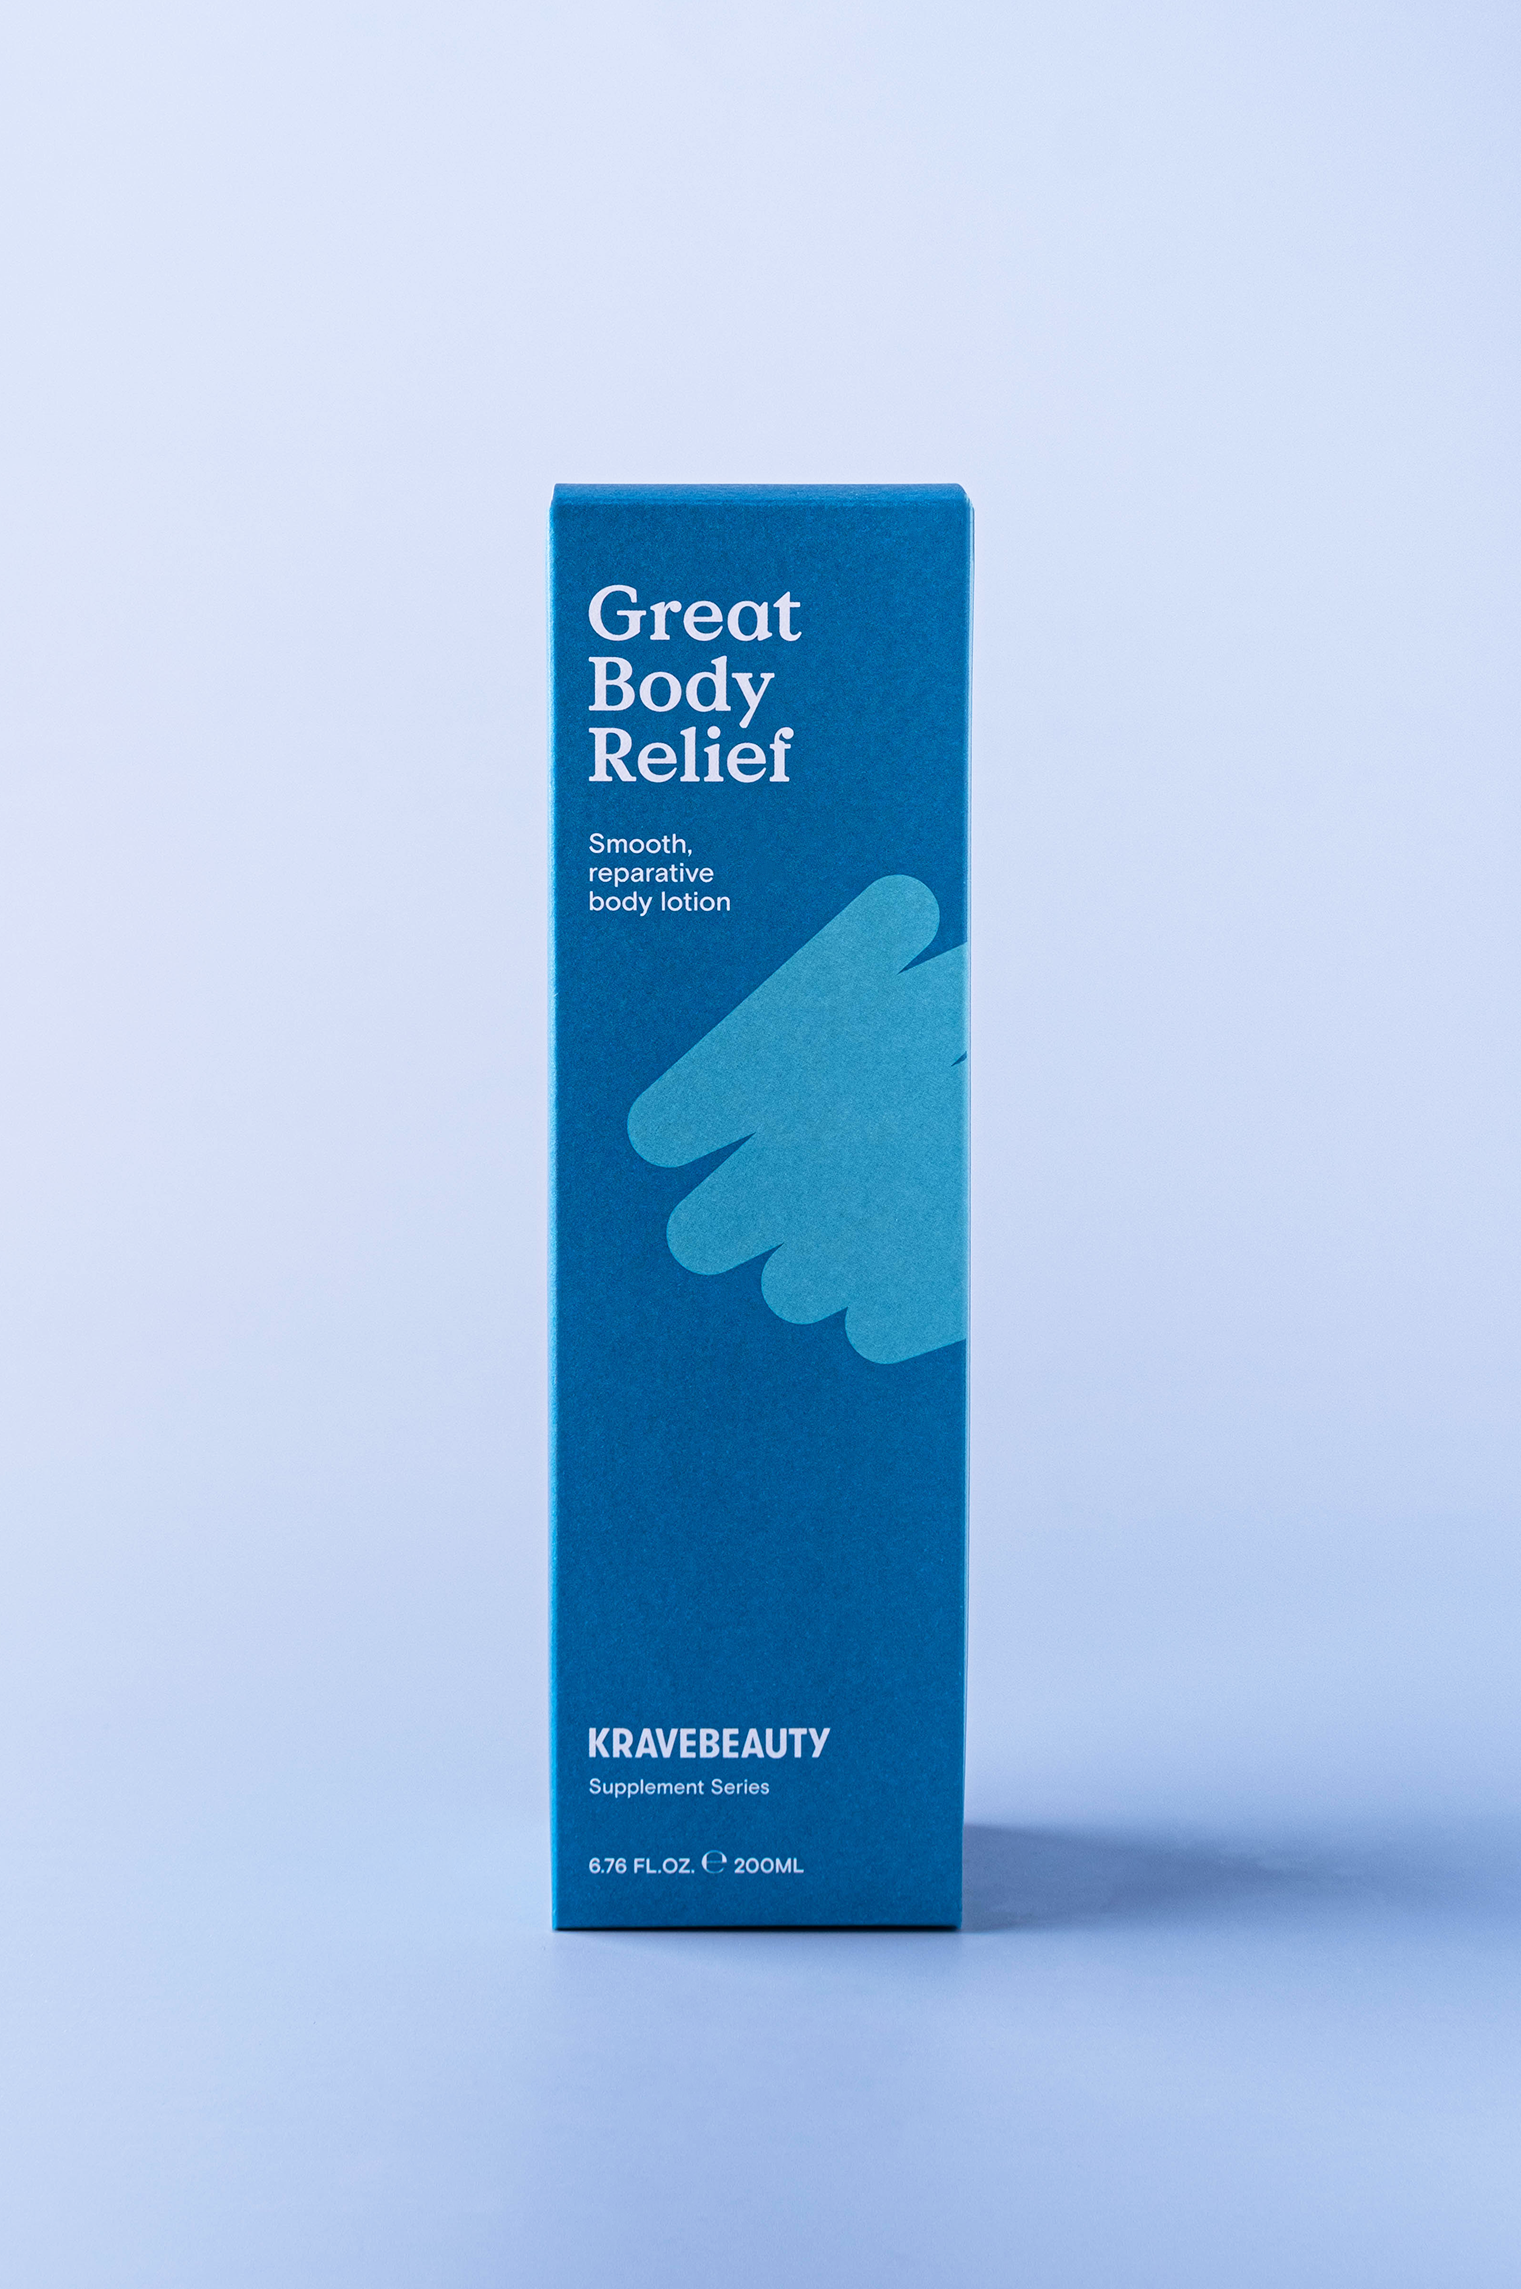 Great Body Relief